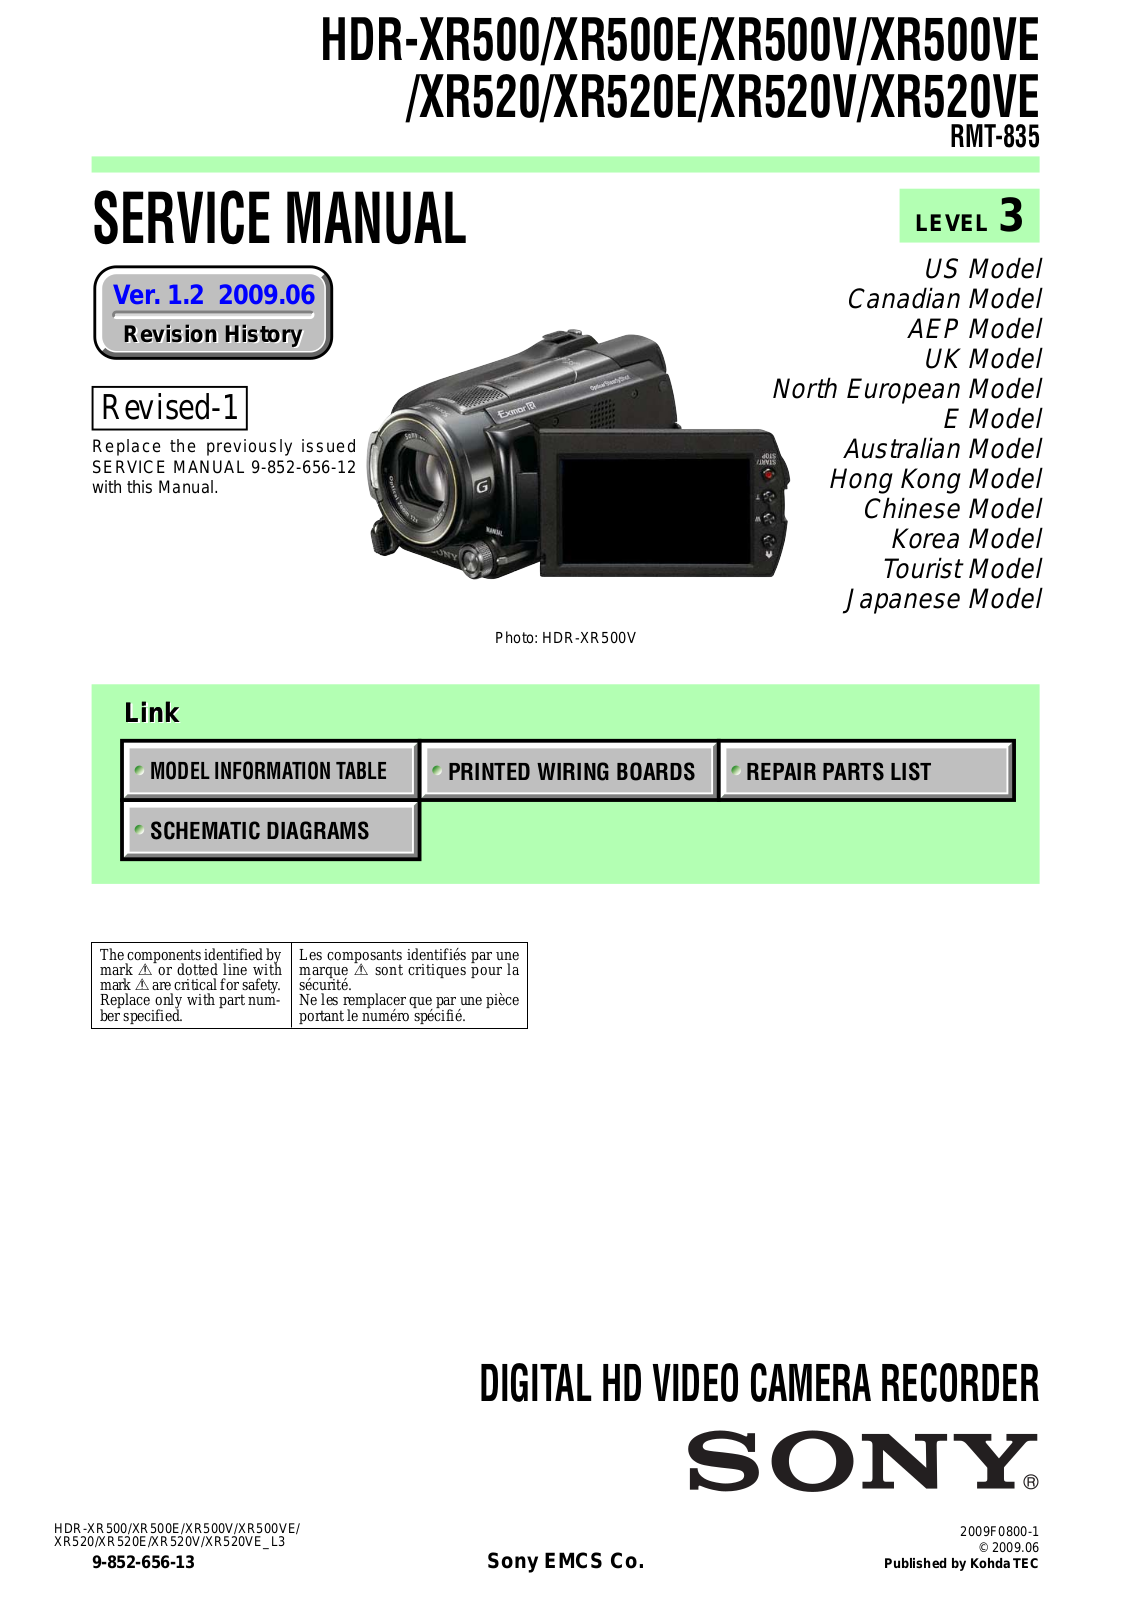 Sony HDR-XR500, HDR-XR500E, HDR-XR500V Service Manual